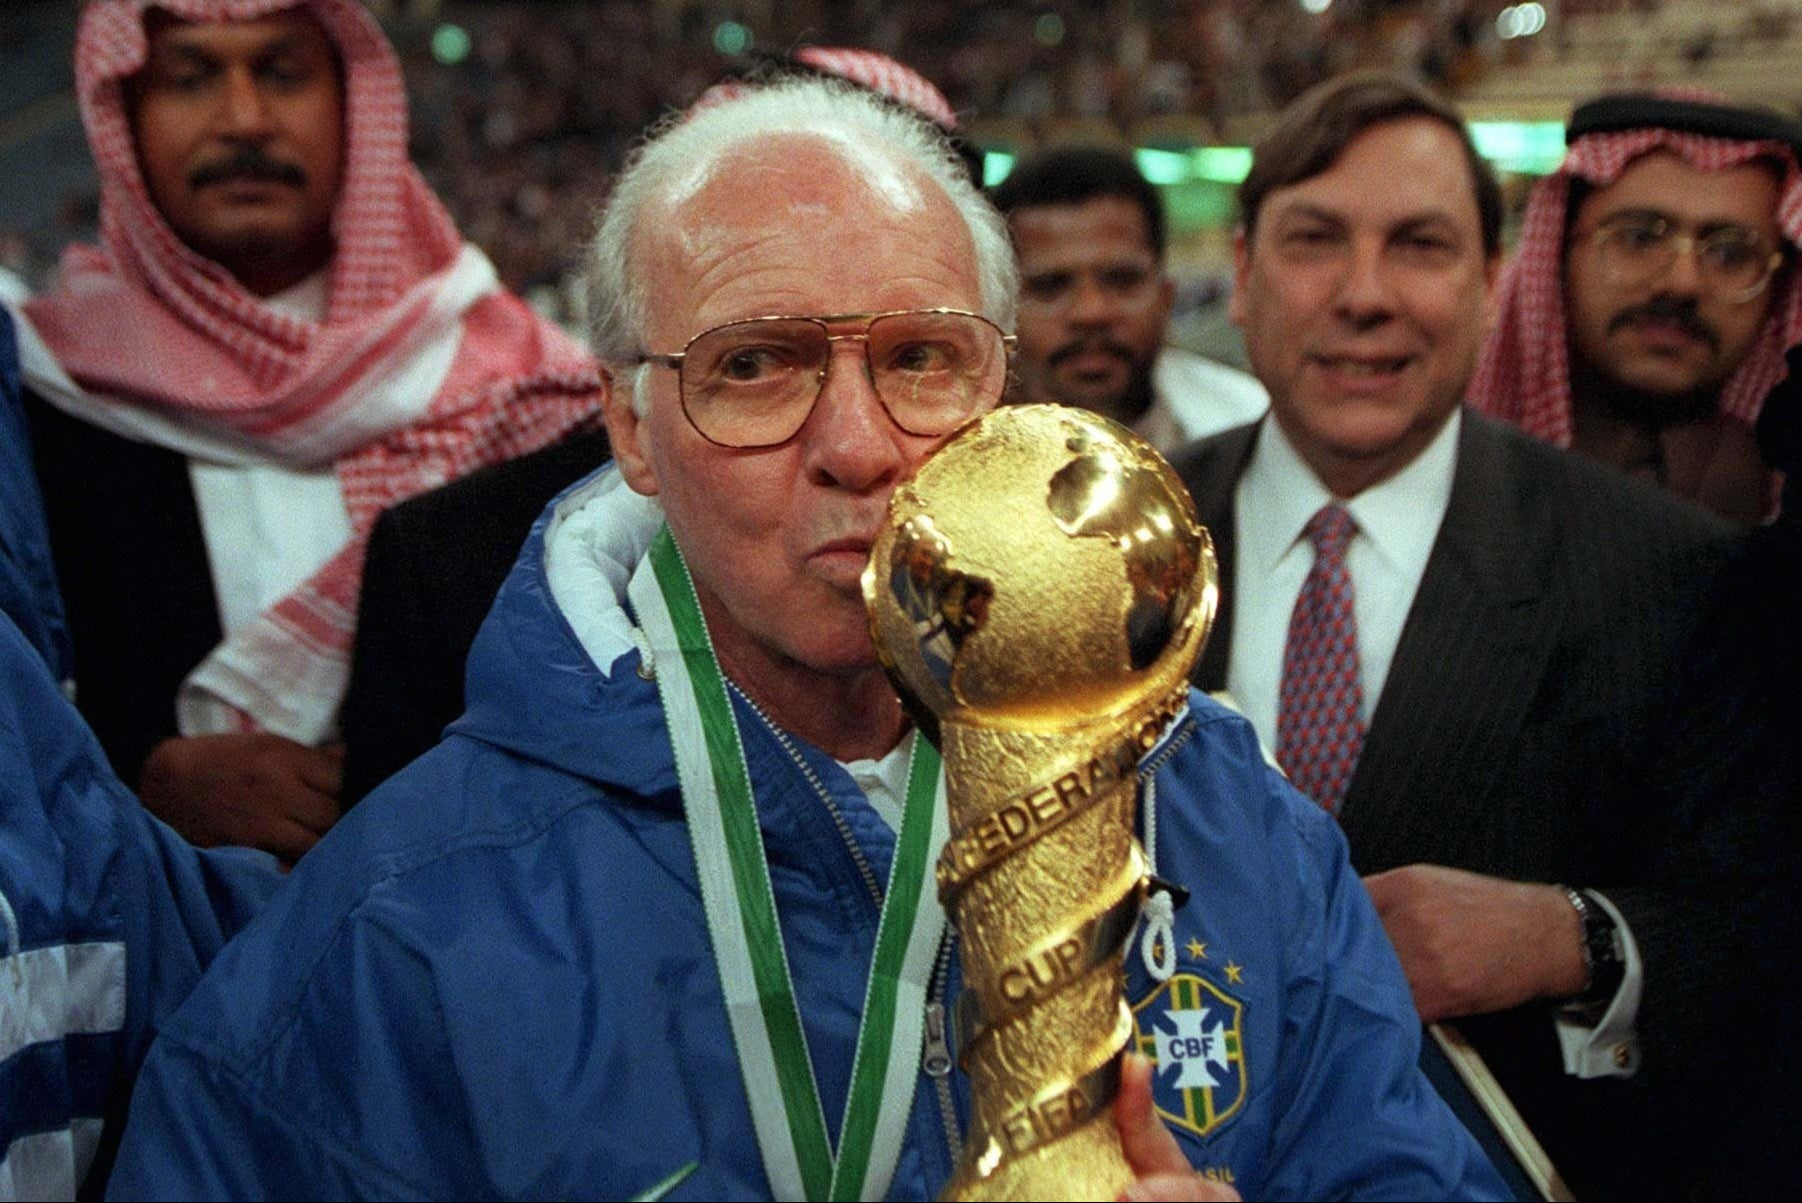 Mario Zagallo coached the 1970 Brazil World Cup squad that featured greats such as Pele, Jairzinho, Rivellino and Tostao